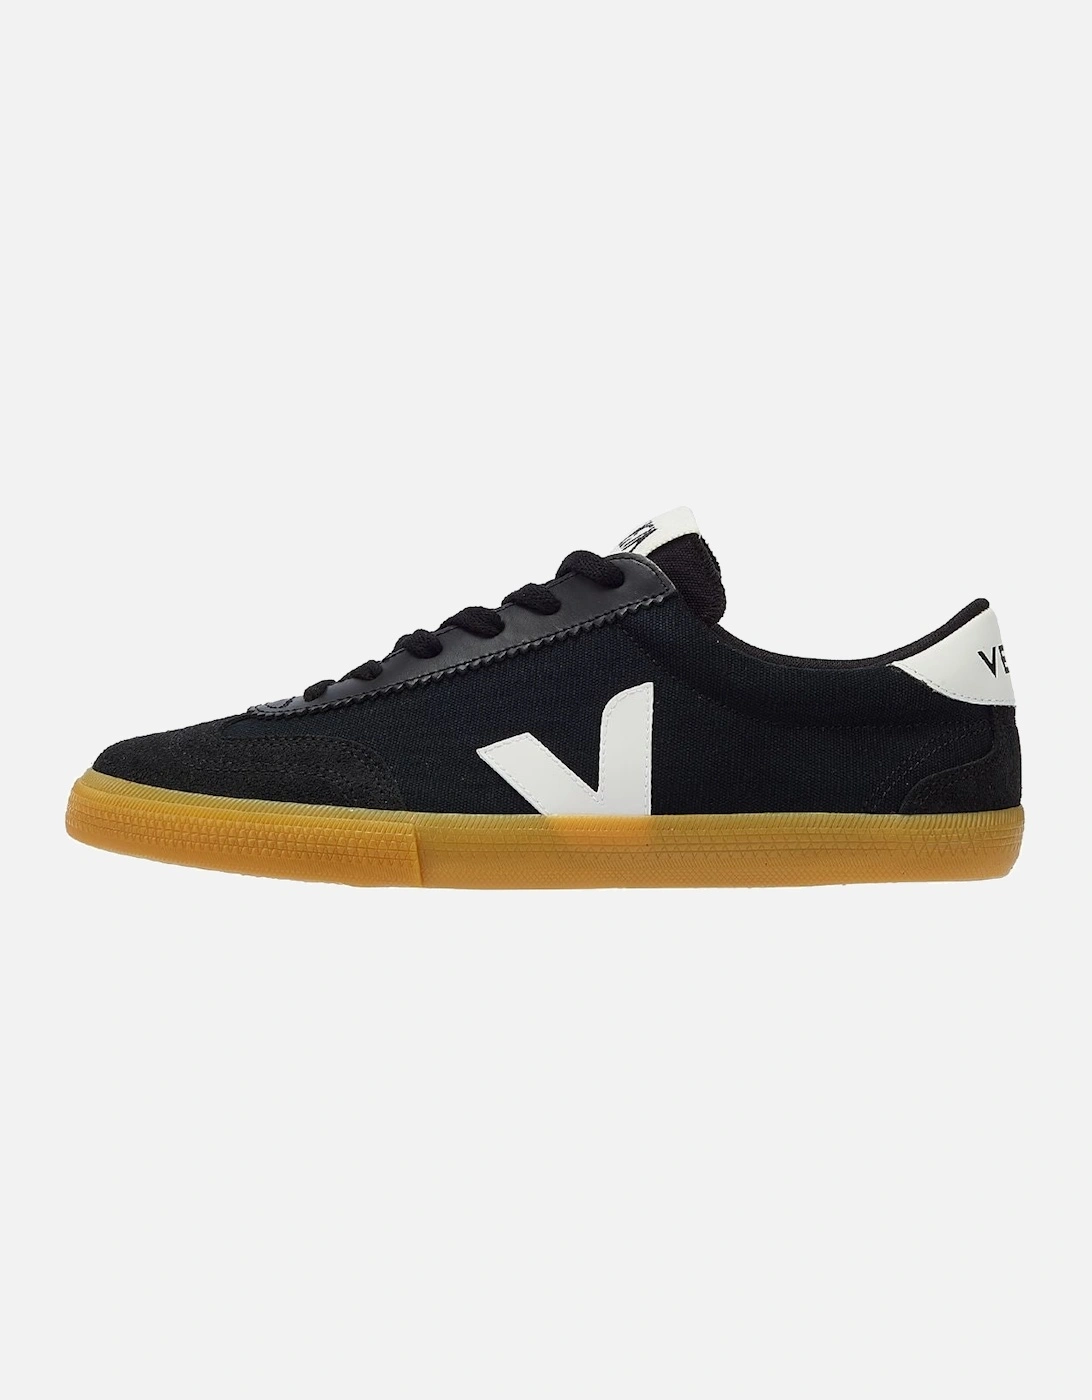 Volley Women's Black/White/Natural Trainers